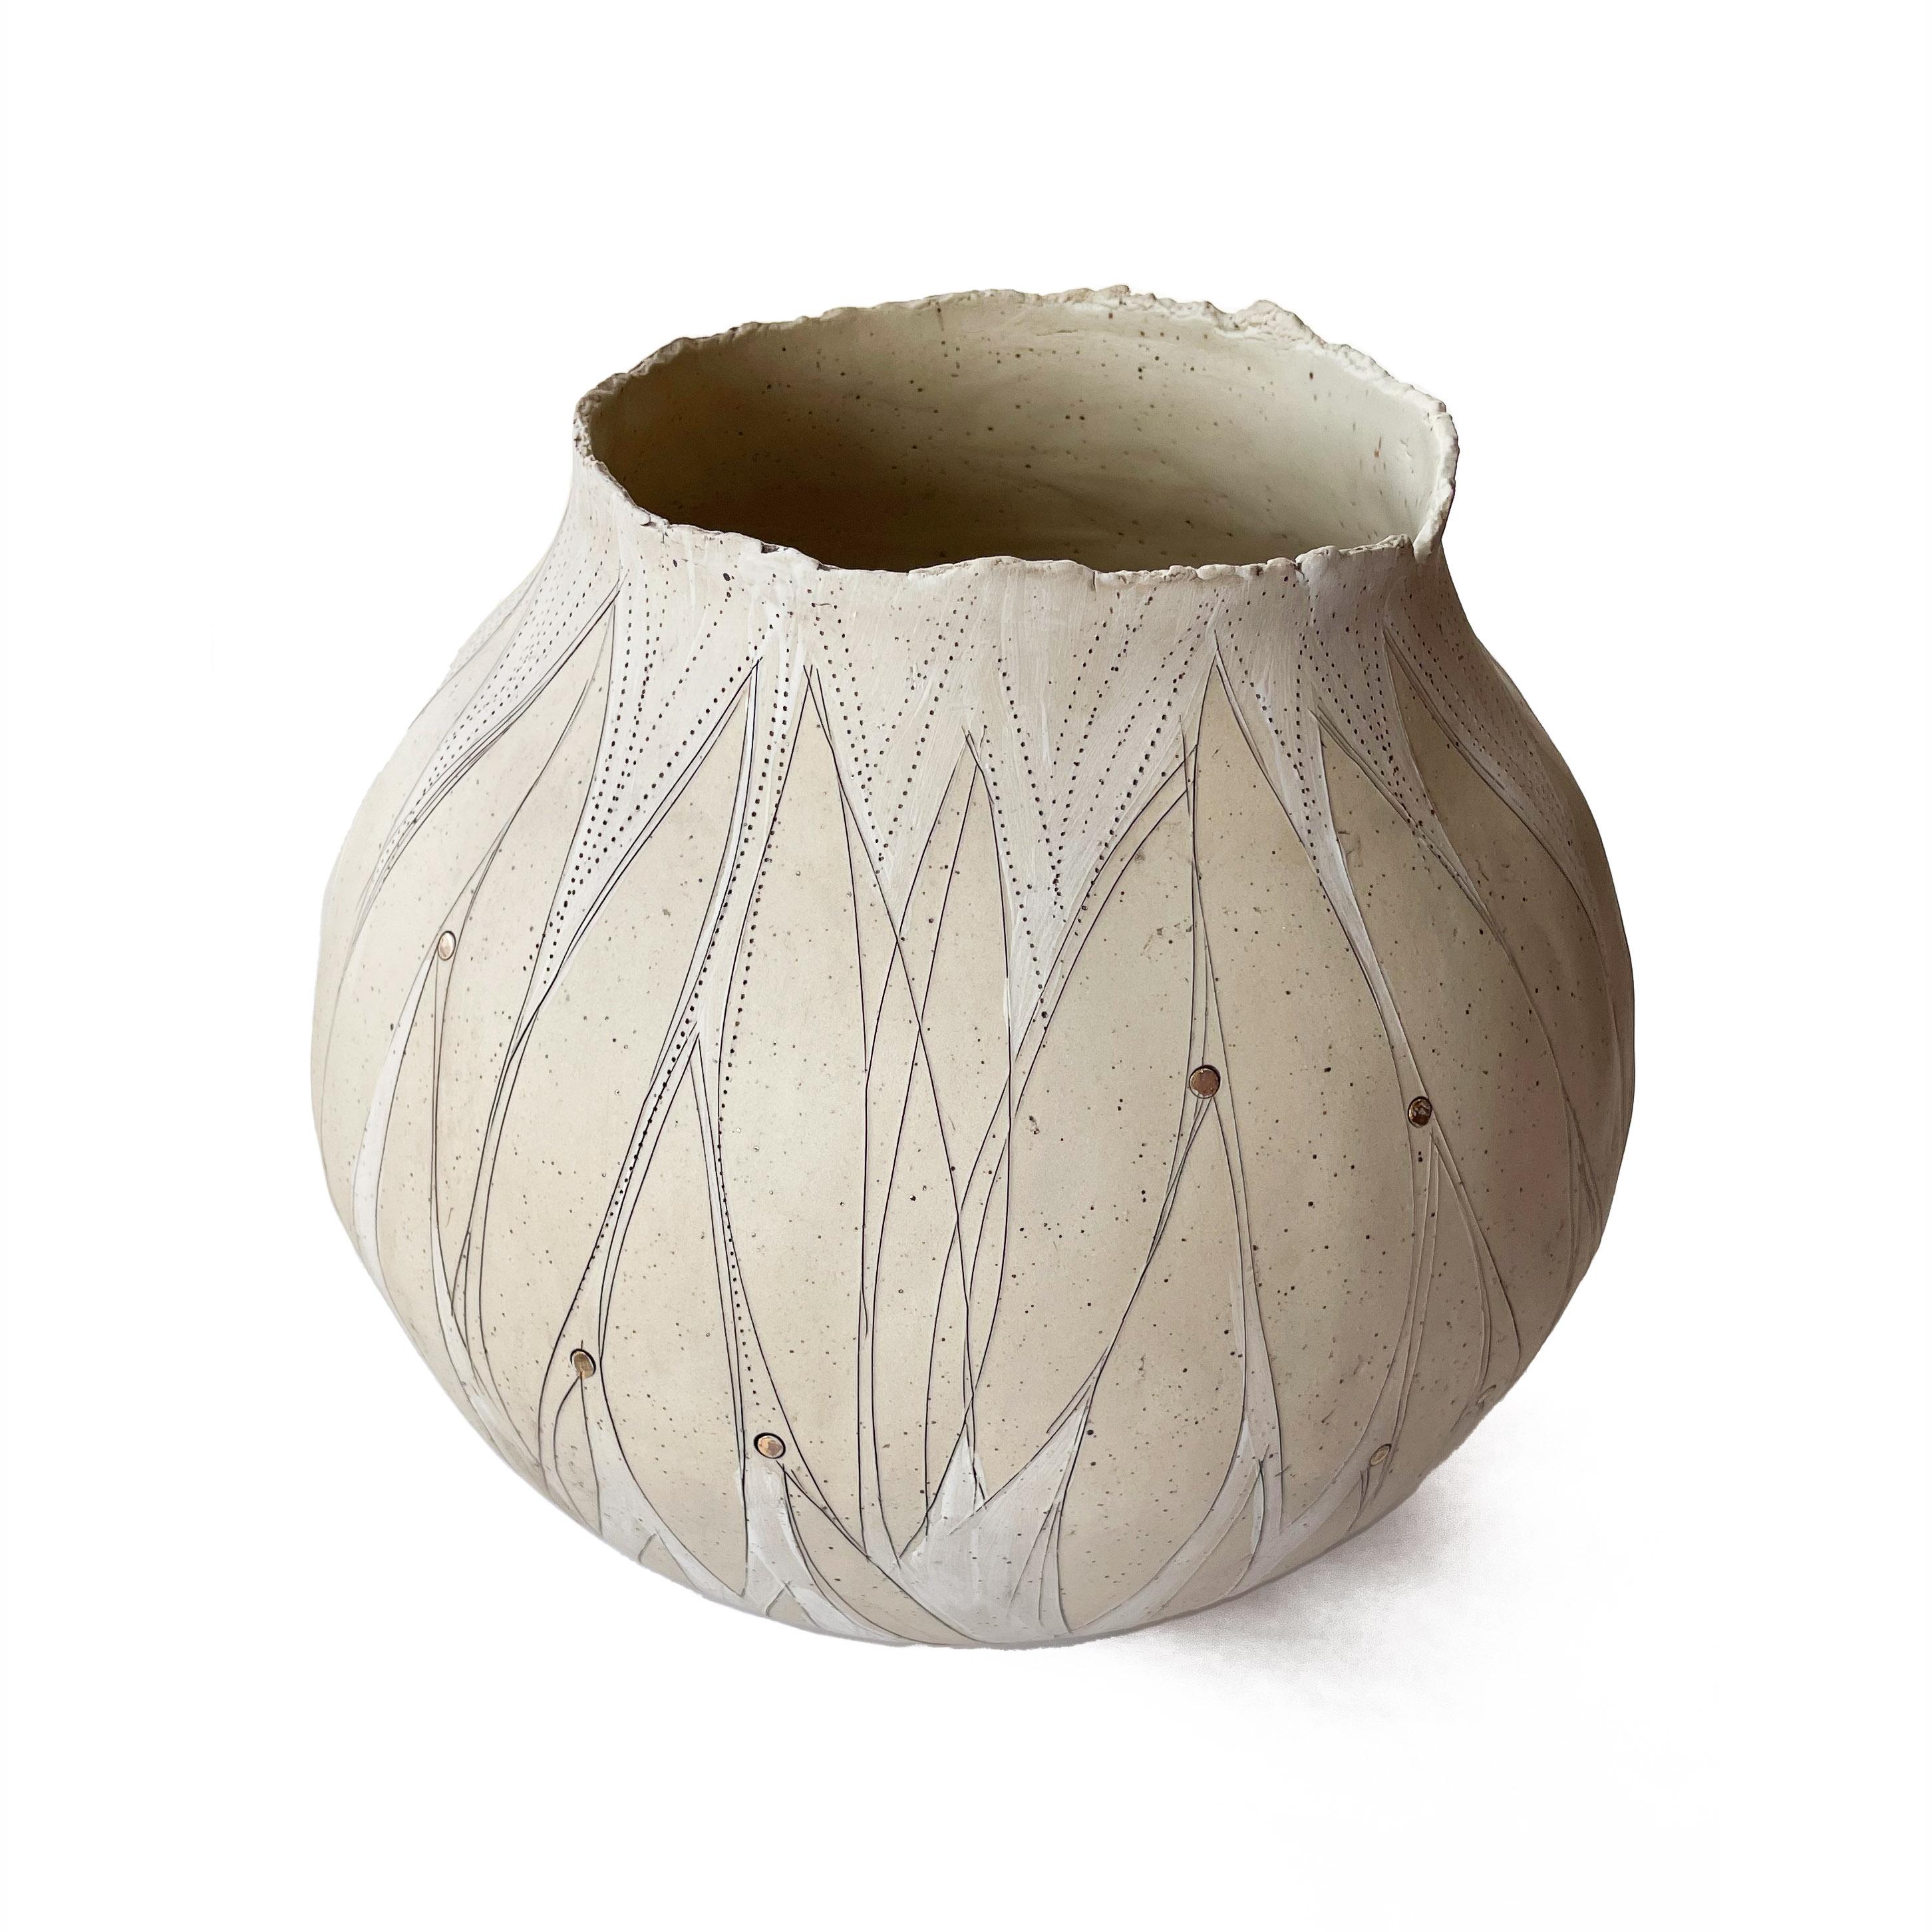 Hand Crafted Promise Golden Stoneware vase with 22kt Gold Detail


A delicate hand-crafted vase, organic in shape with a torn clay opening in natural unglazed speckled stoneware clay.
Part of the Golden Promise Series which is a theme of abstracted